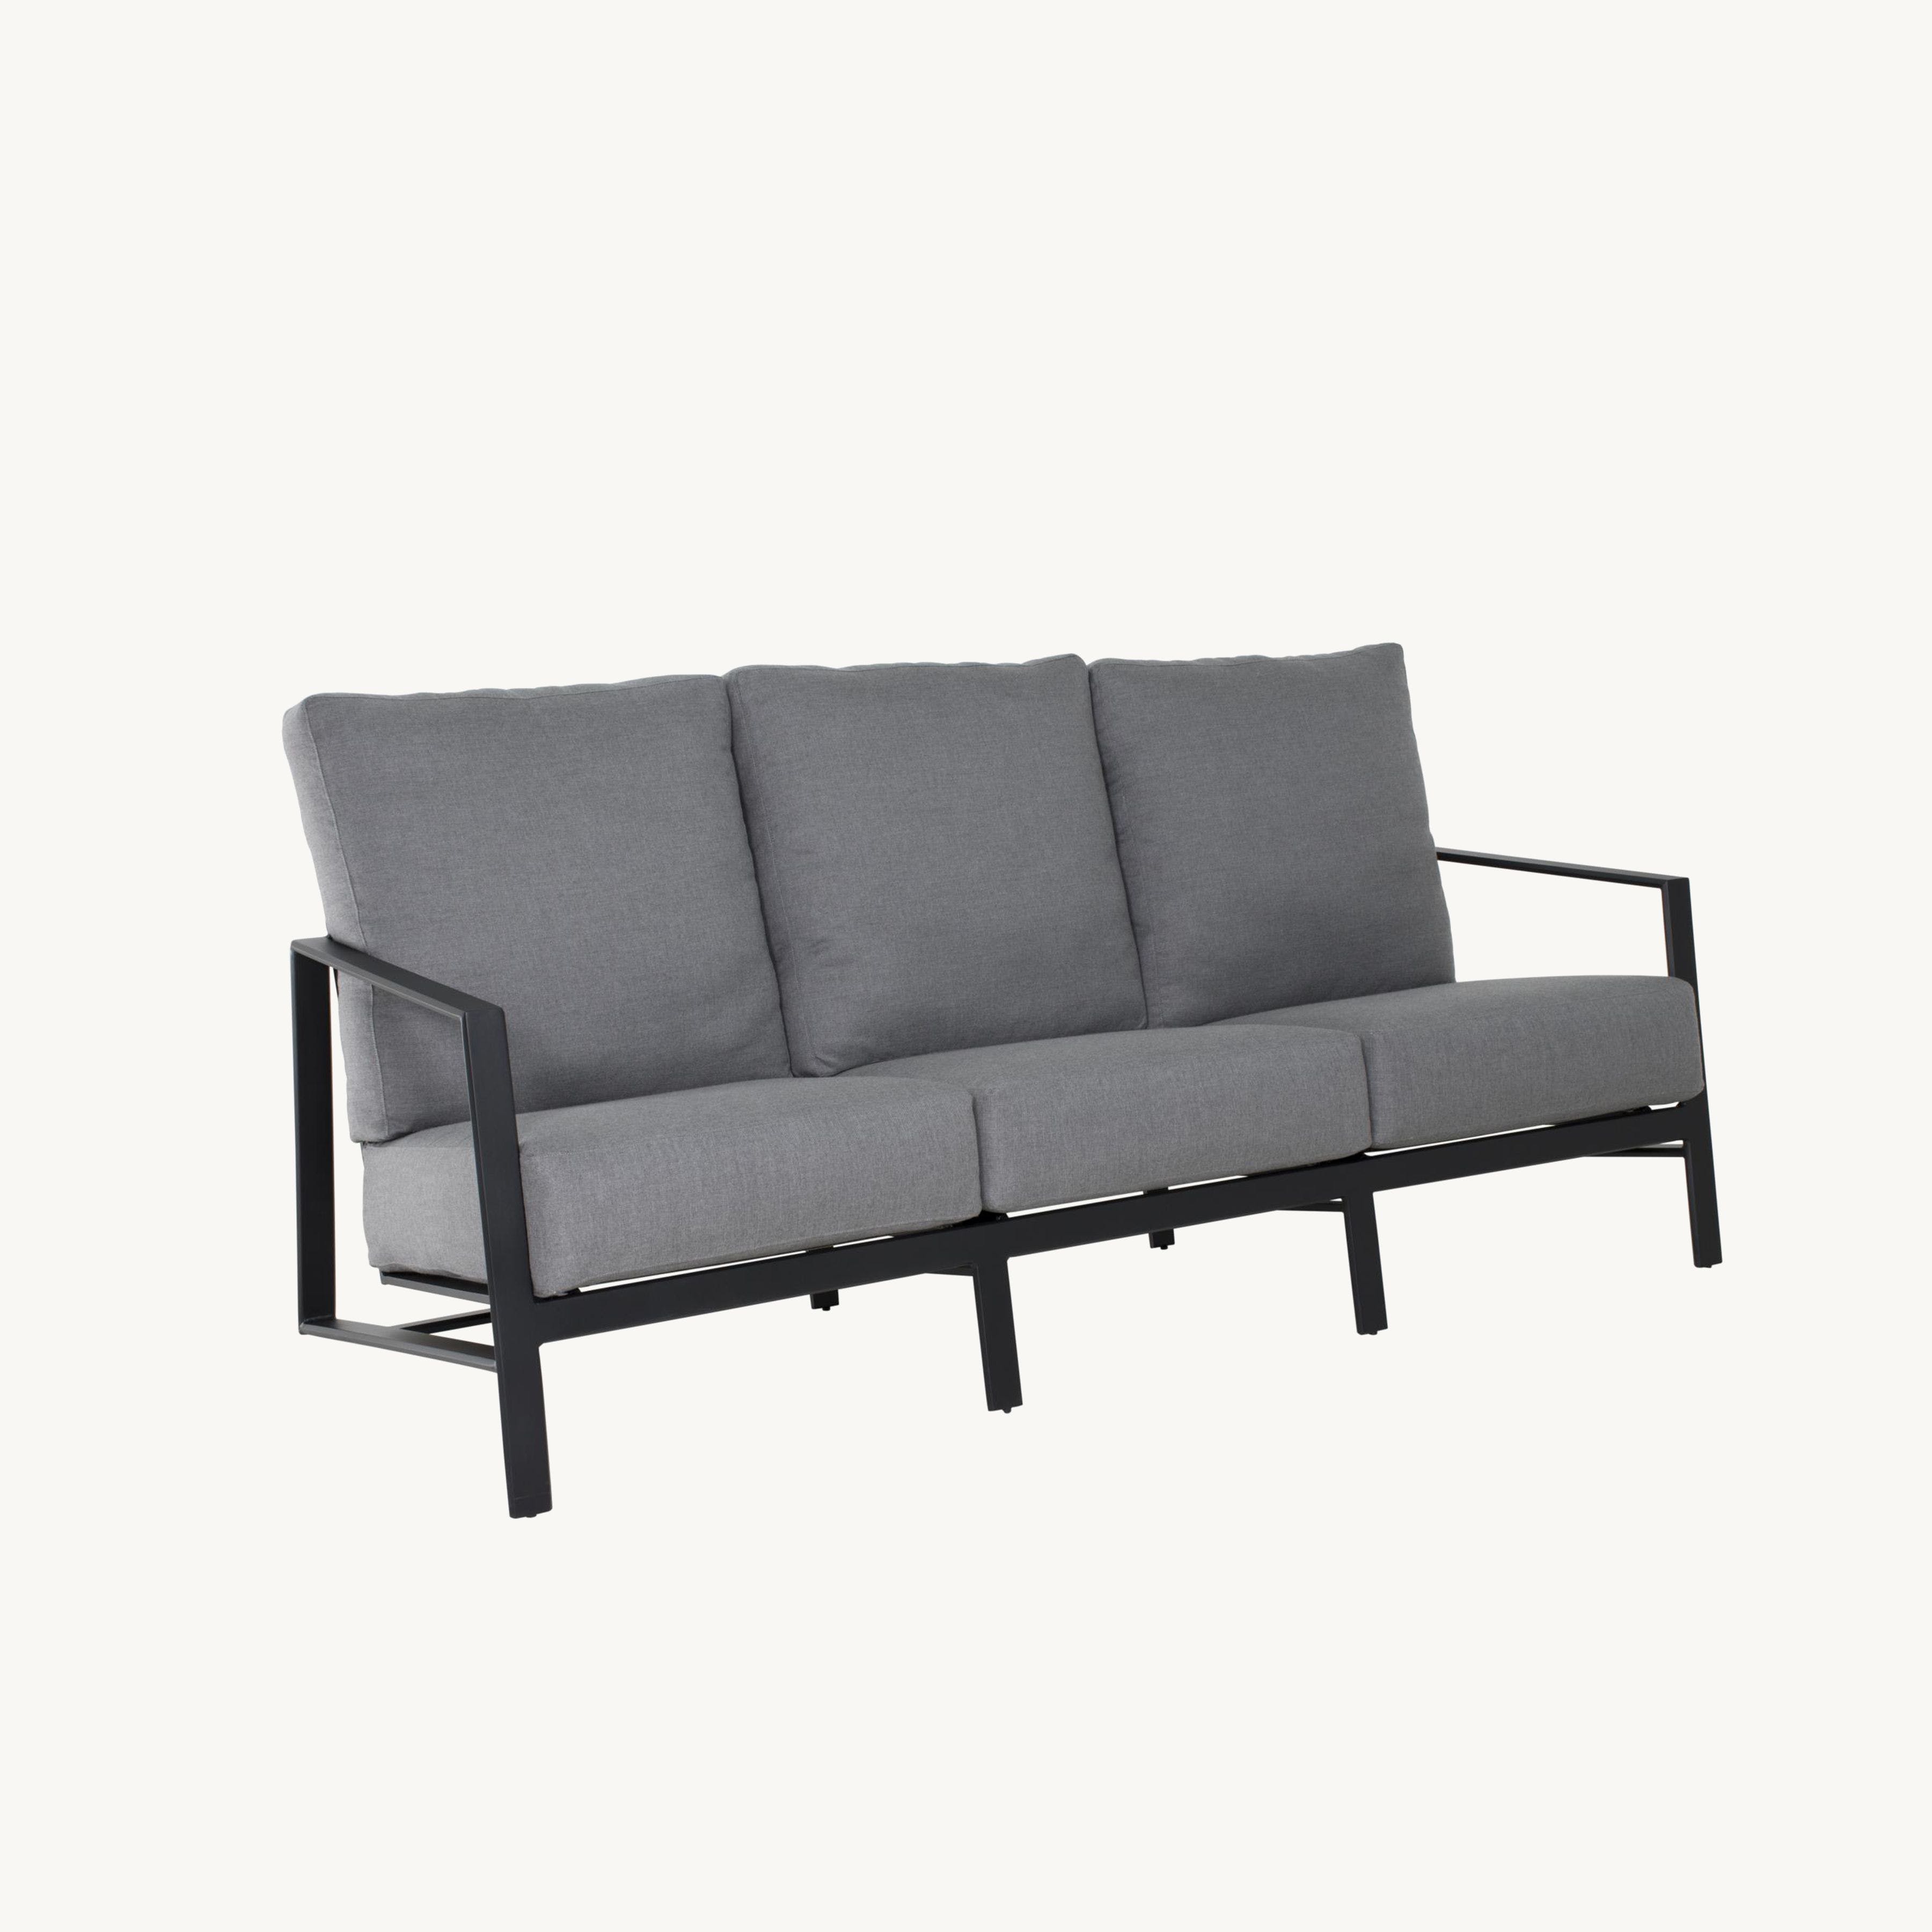 Prism Cushioned Sofa By Castelle